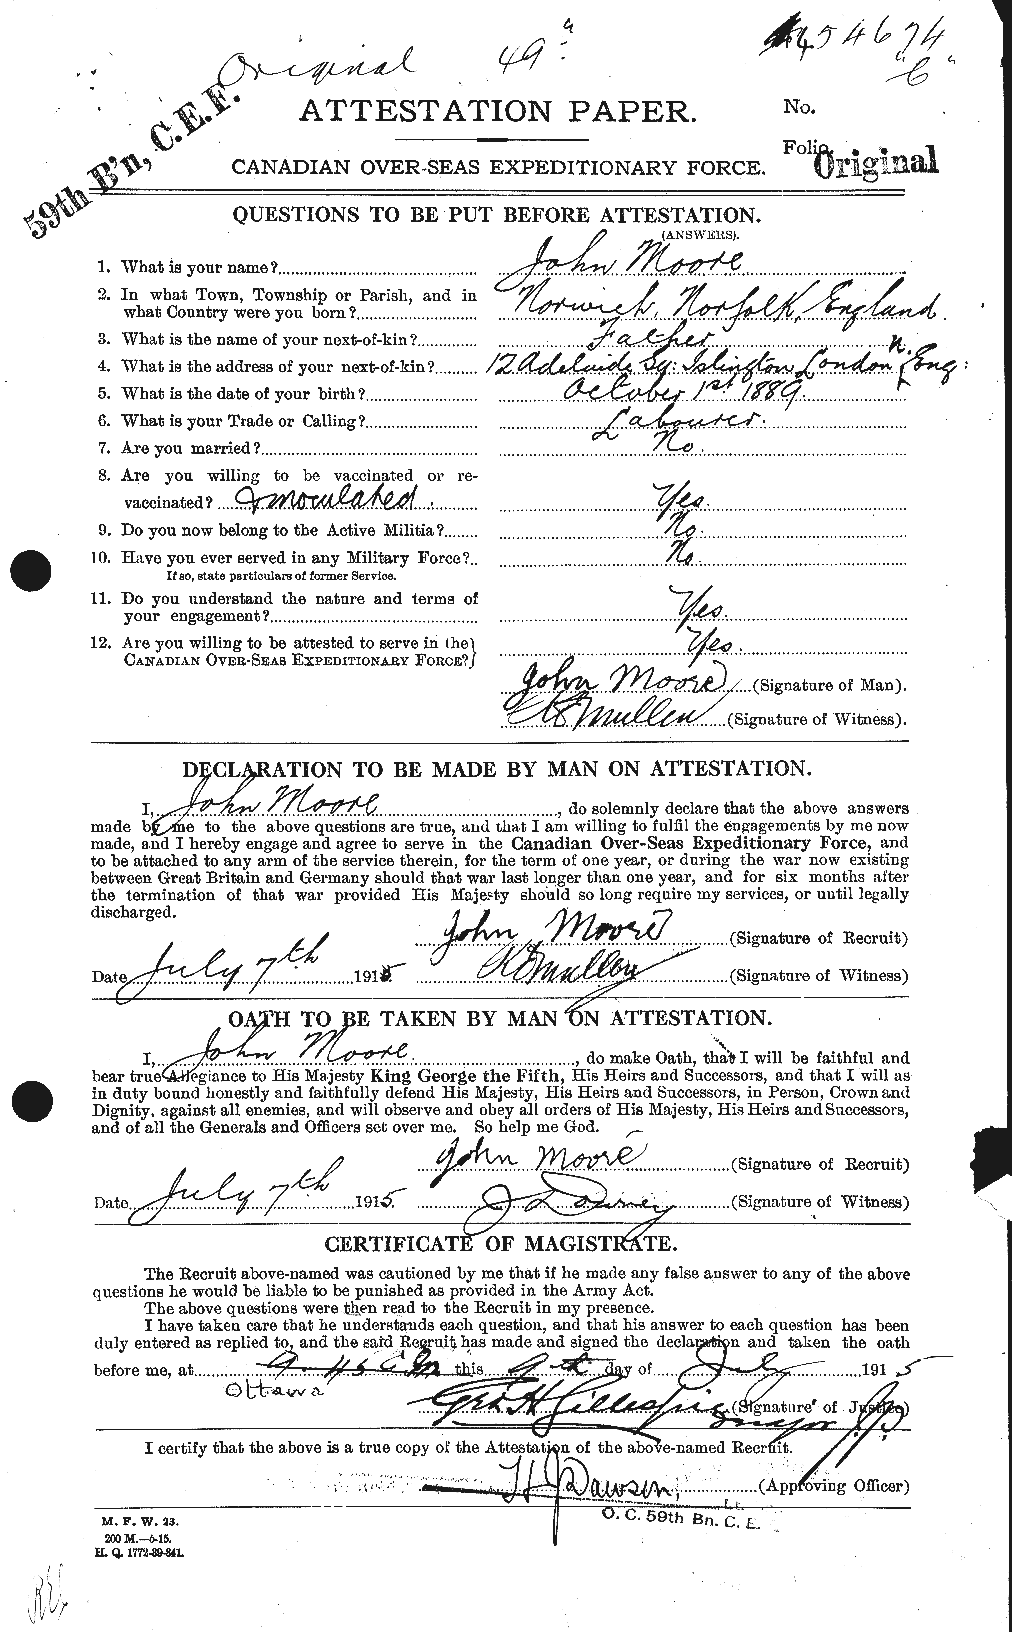 Personnel Records of the First World War - CEF 503248a